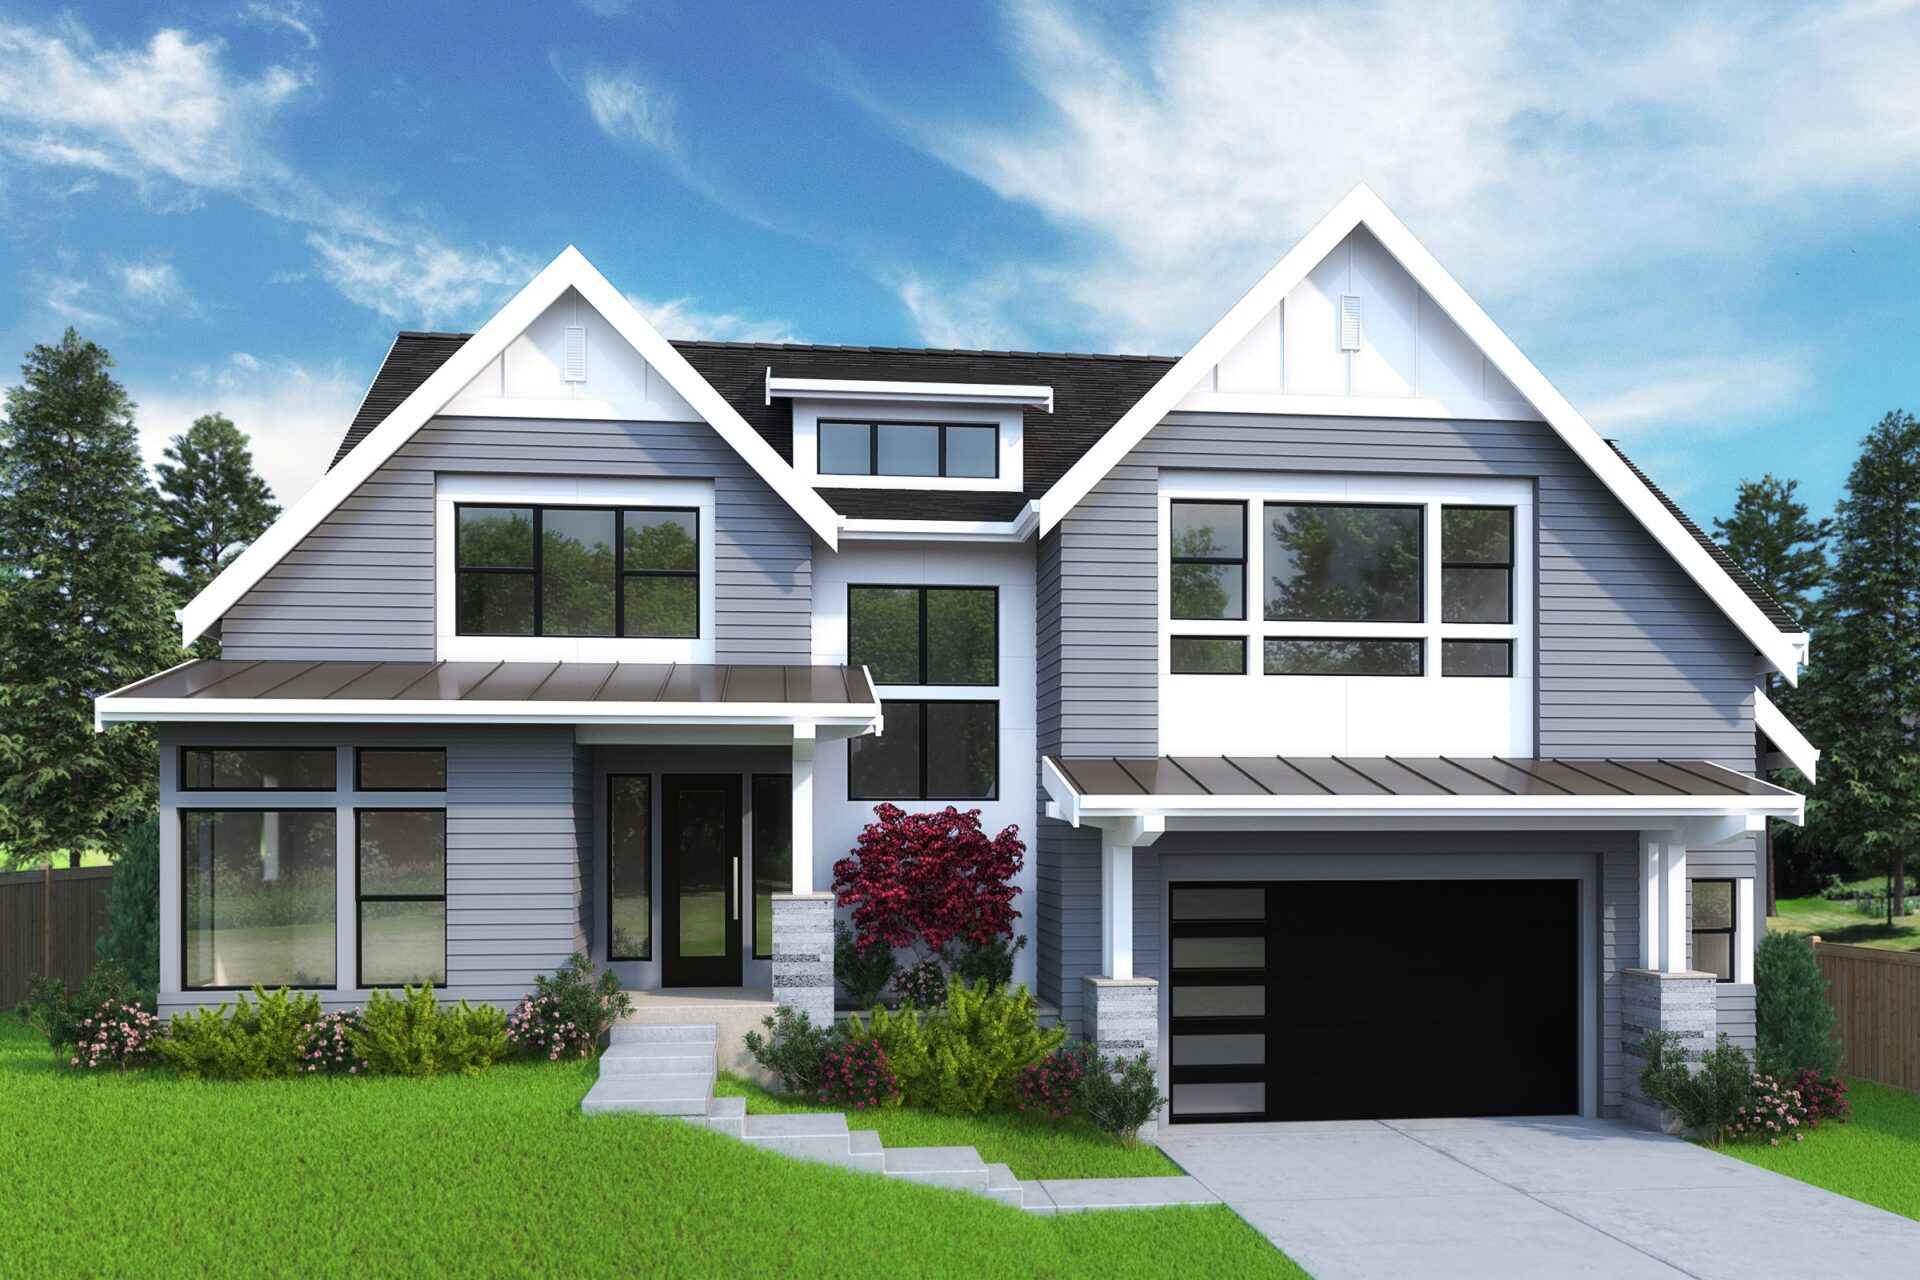 View our new luxury home construction on 4219 123rd Ave SE, in Bellevue, WA from MN Custom Homes